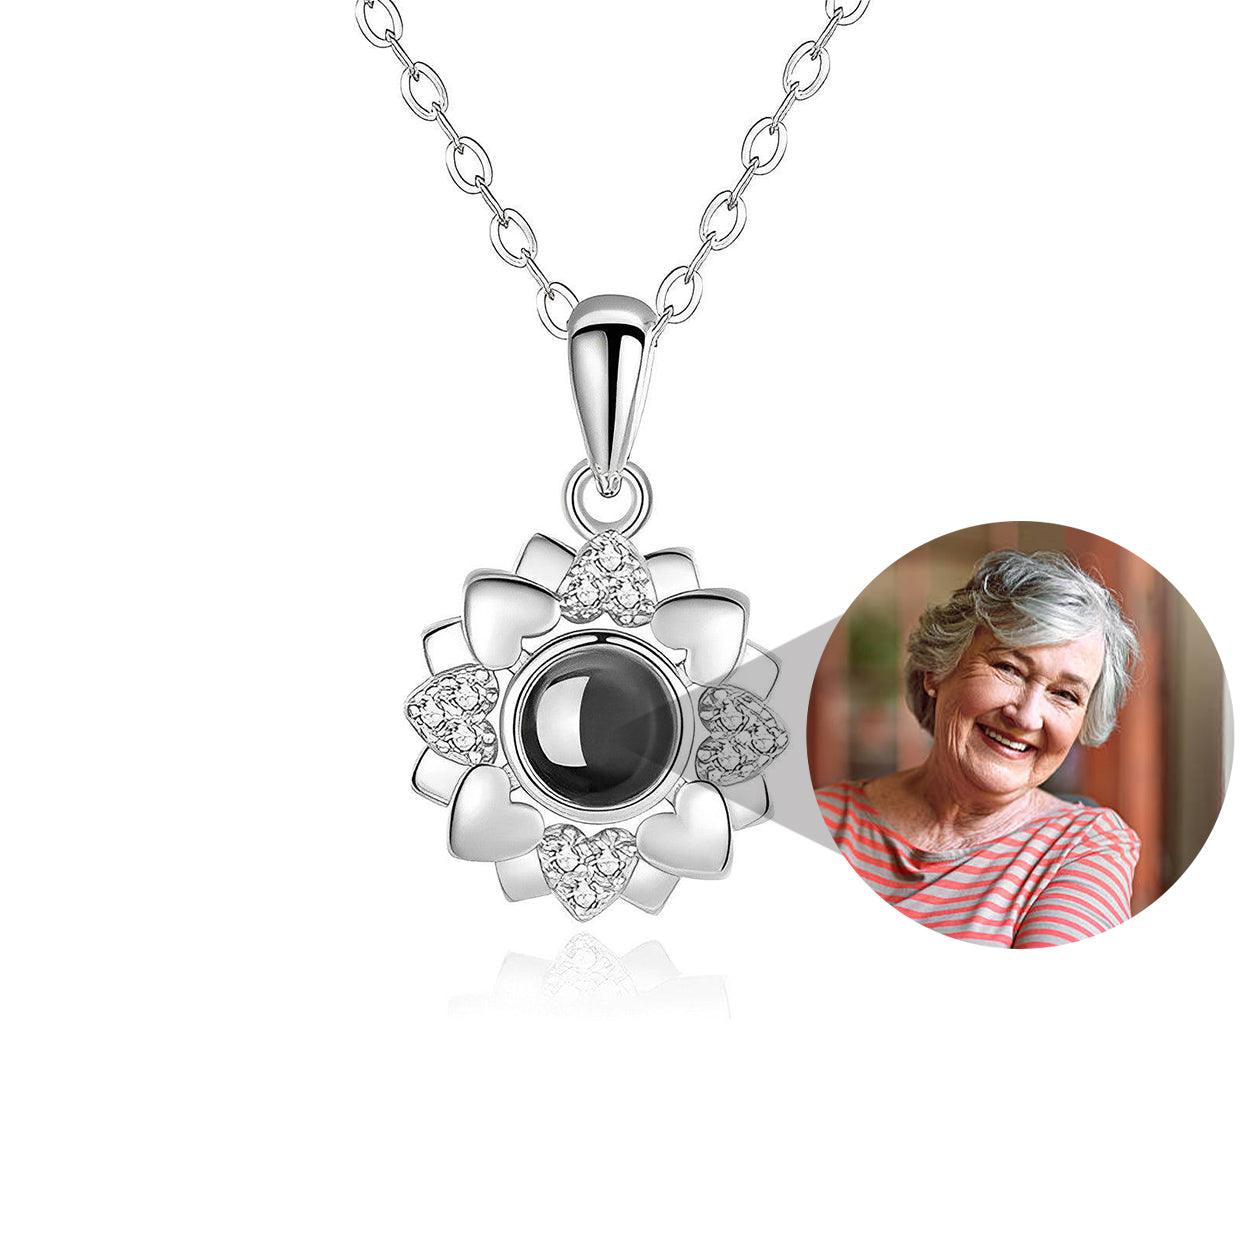 Eternity's Blossom Photo Necklace